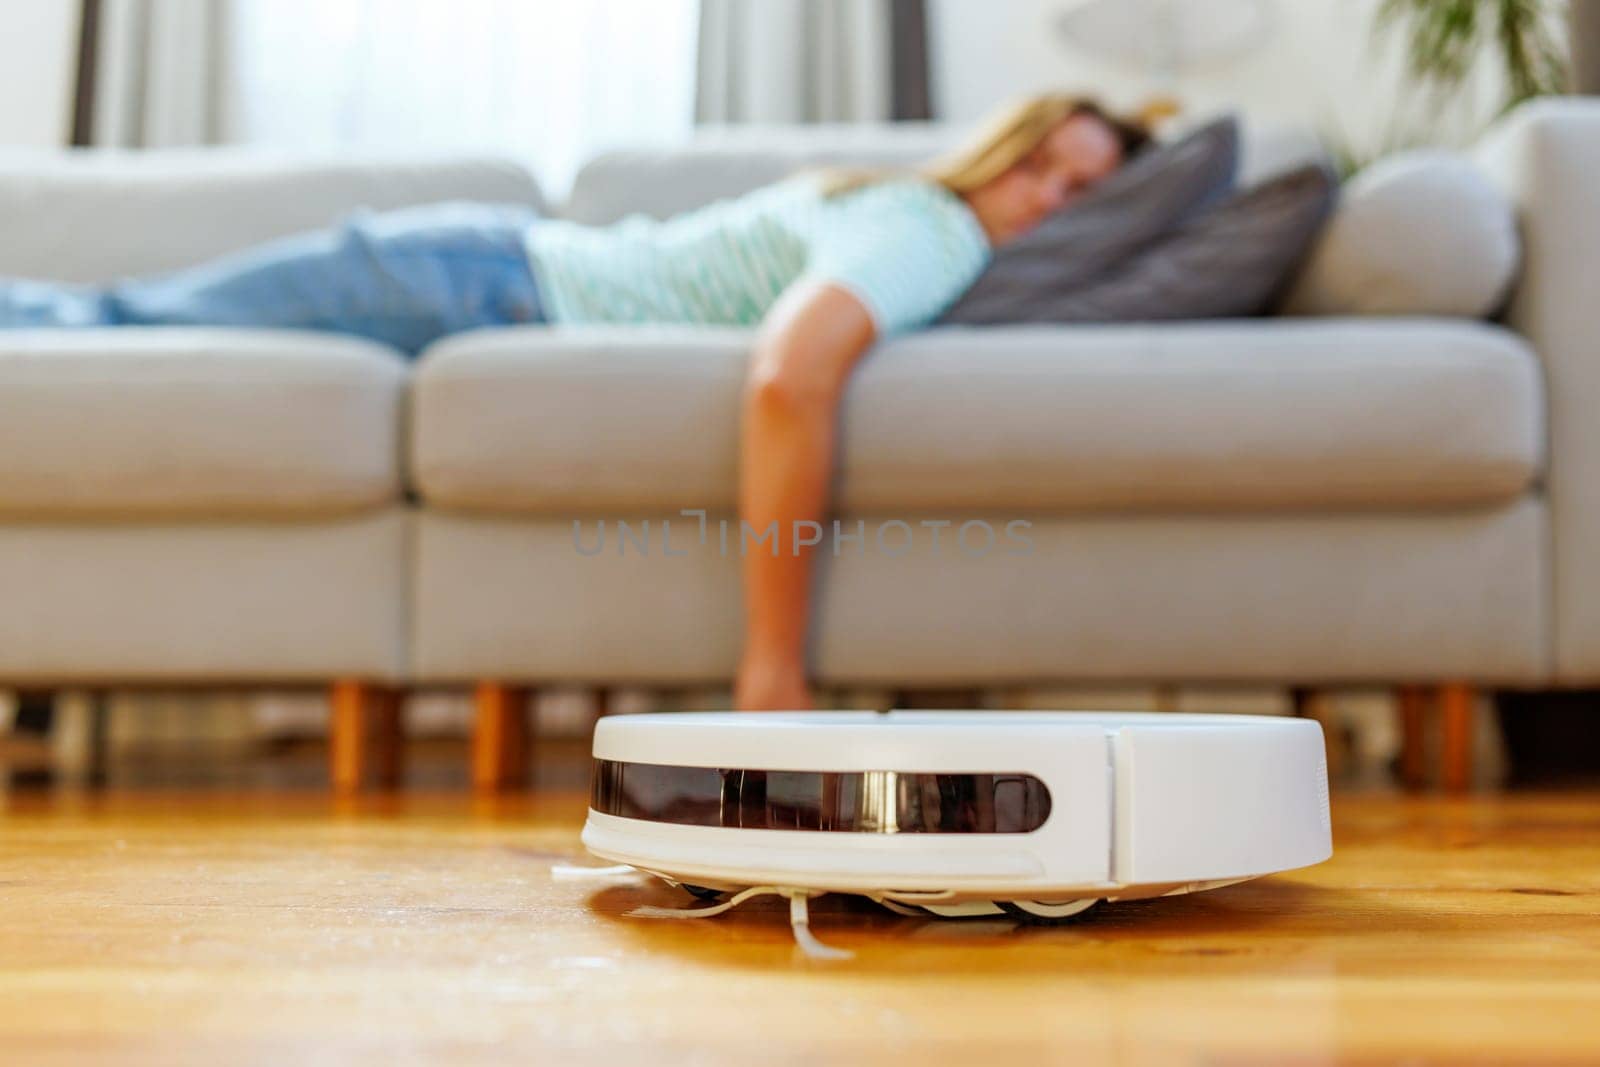 A woman takes a peaceful nap on the couch while the robotic vacuum cleaner quietly cleans the hardwood floor in a bright living room.